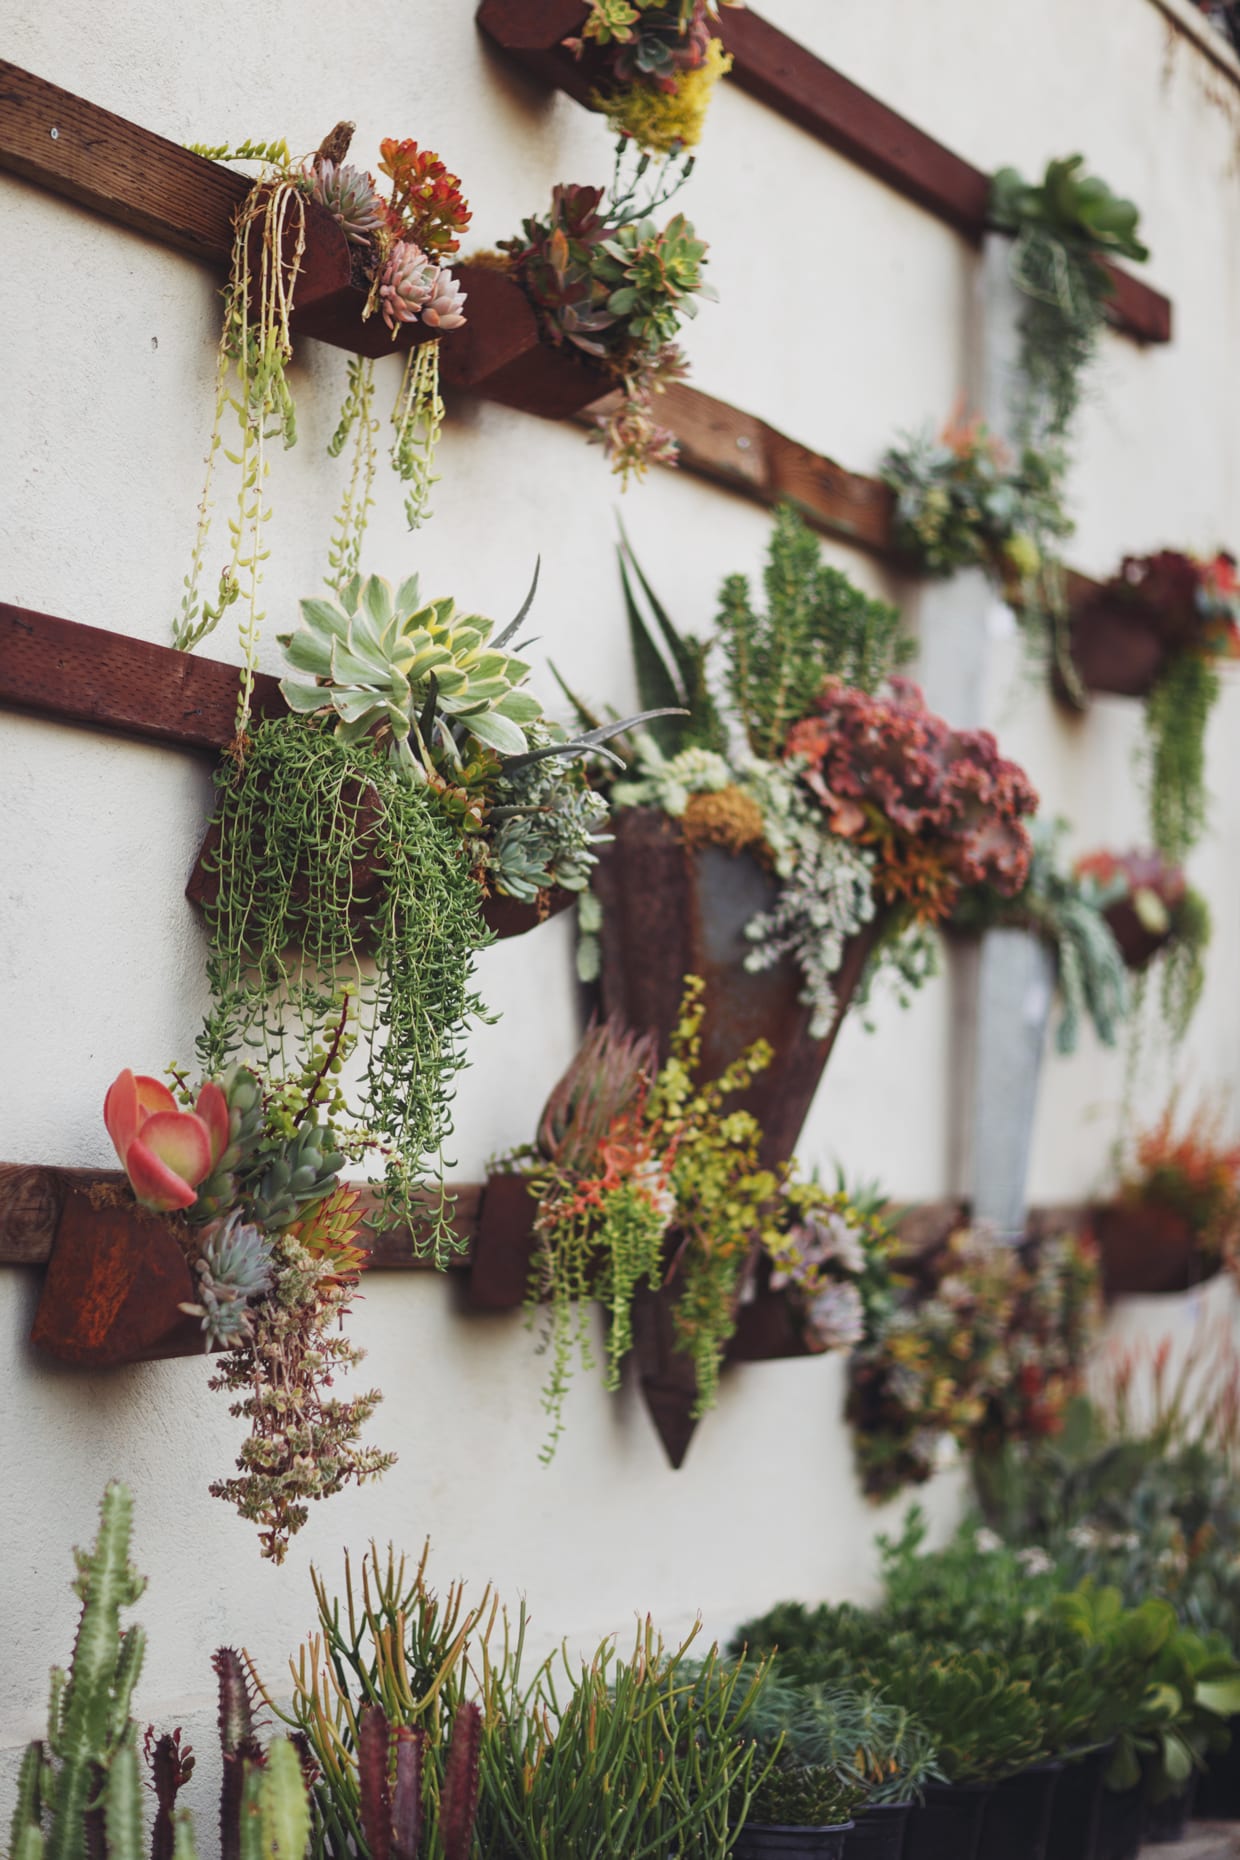 A wall garden with a variety of succulents.